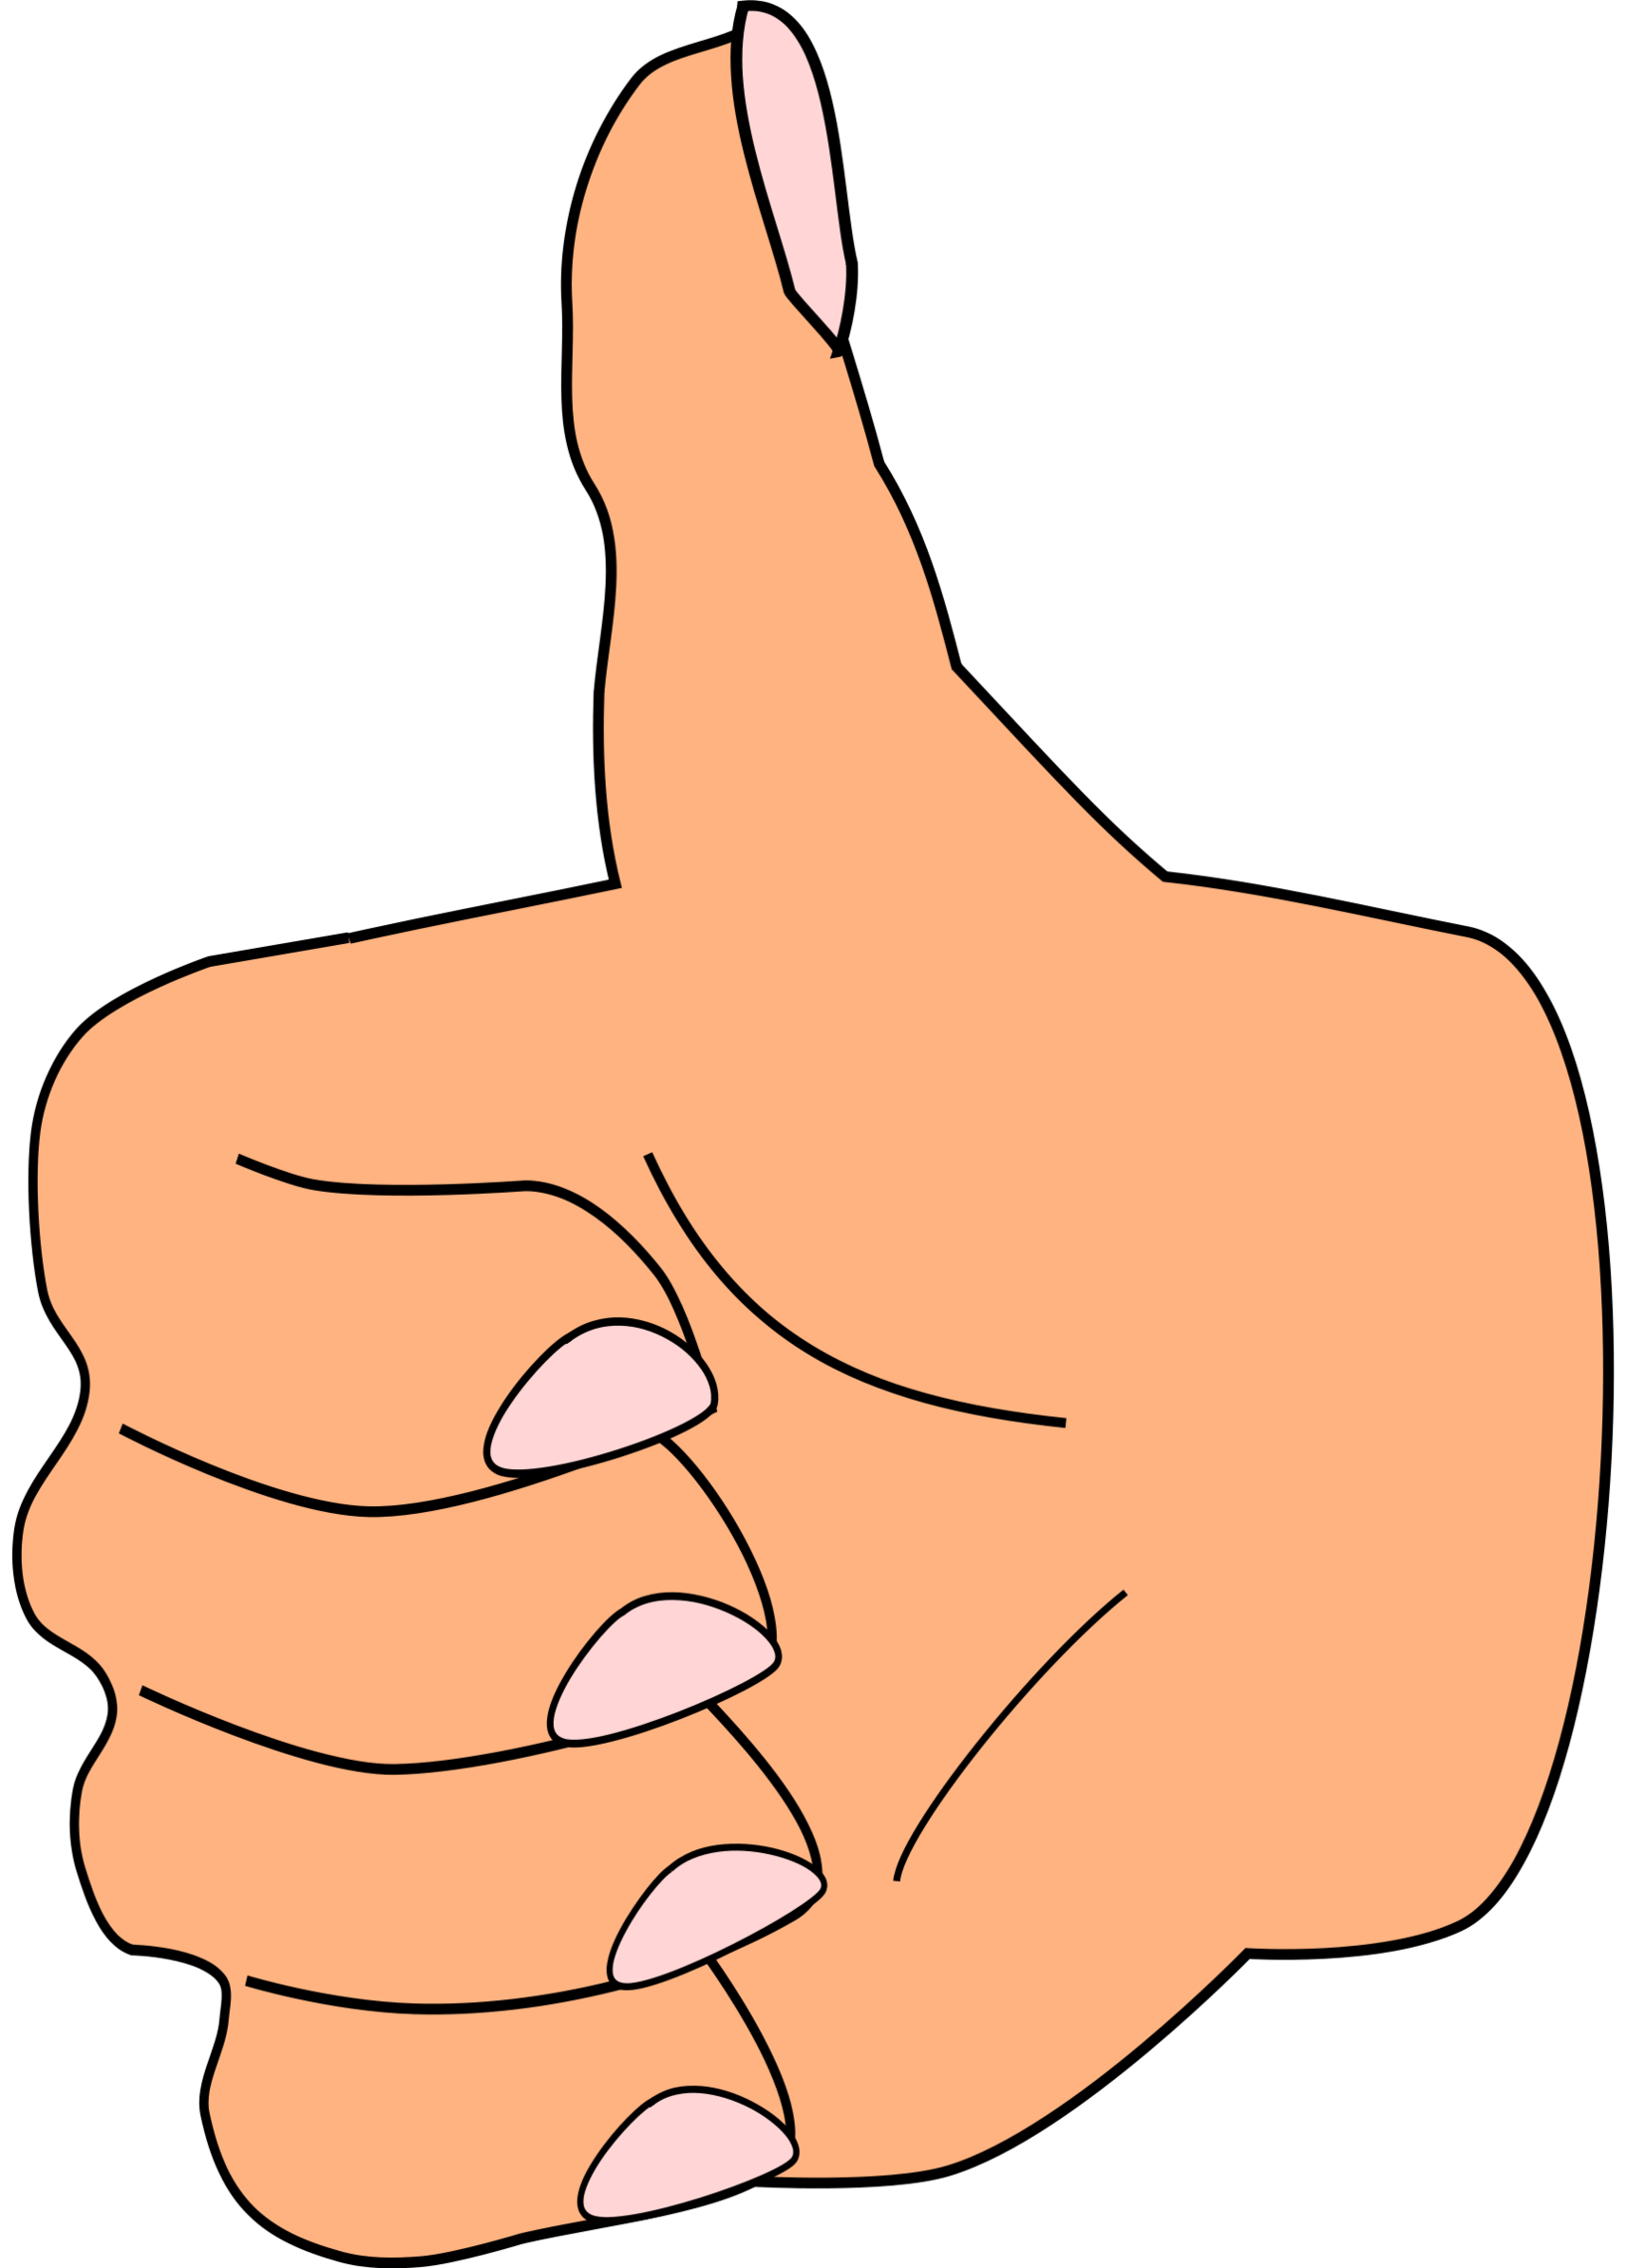 Thumbs up clipart free images 3 2